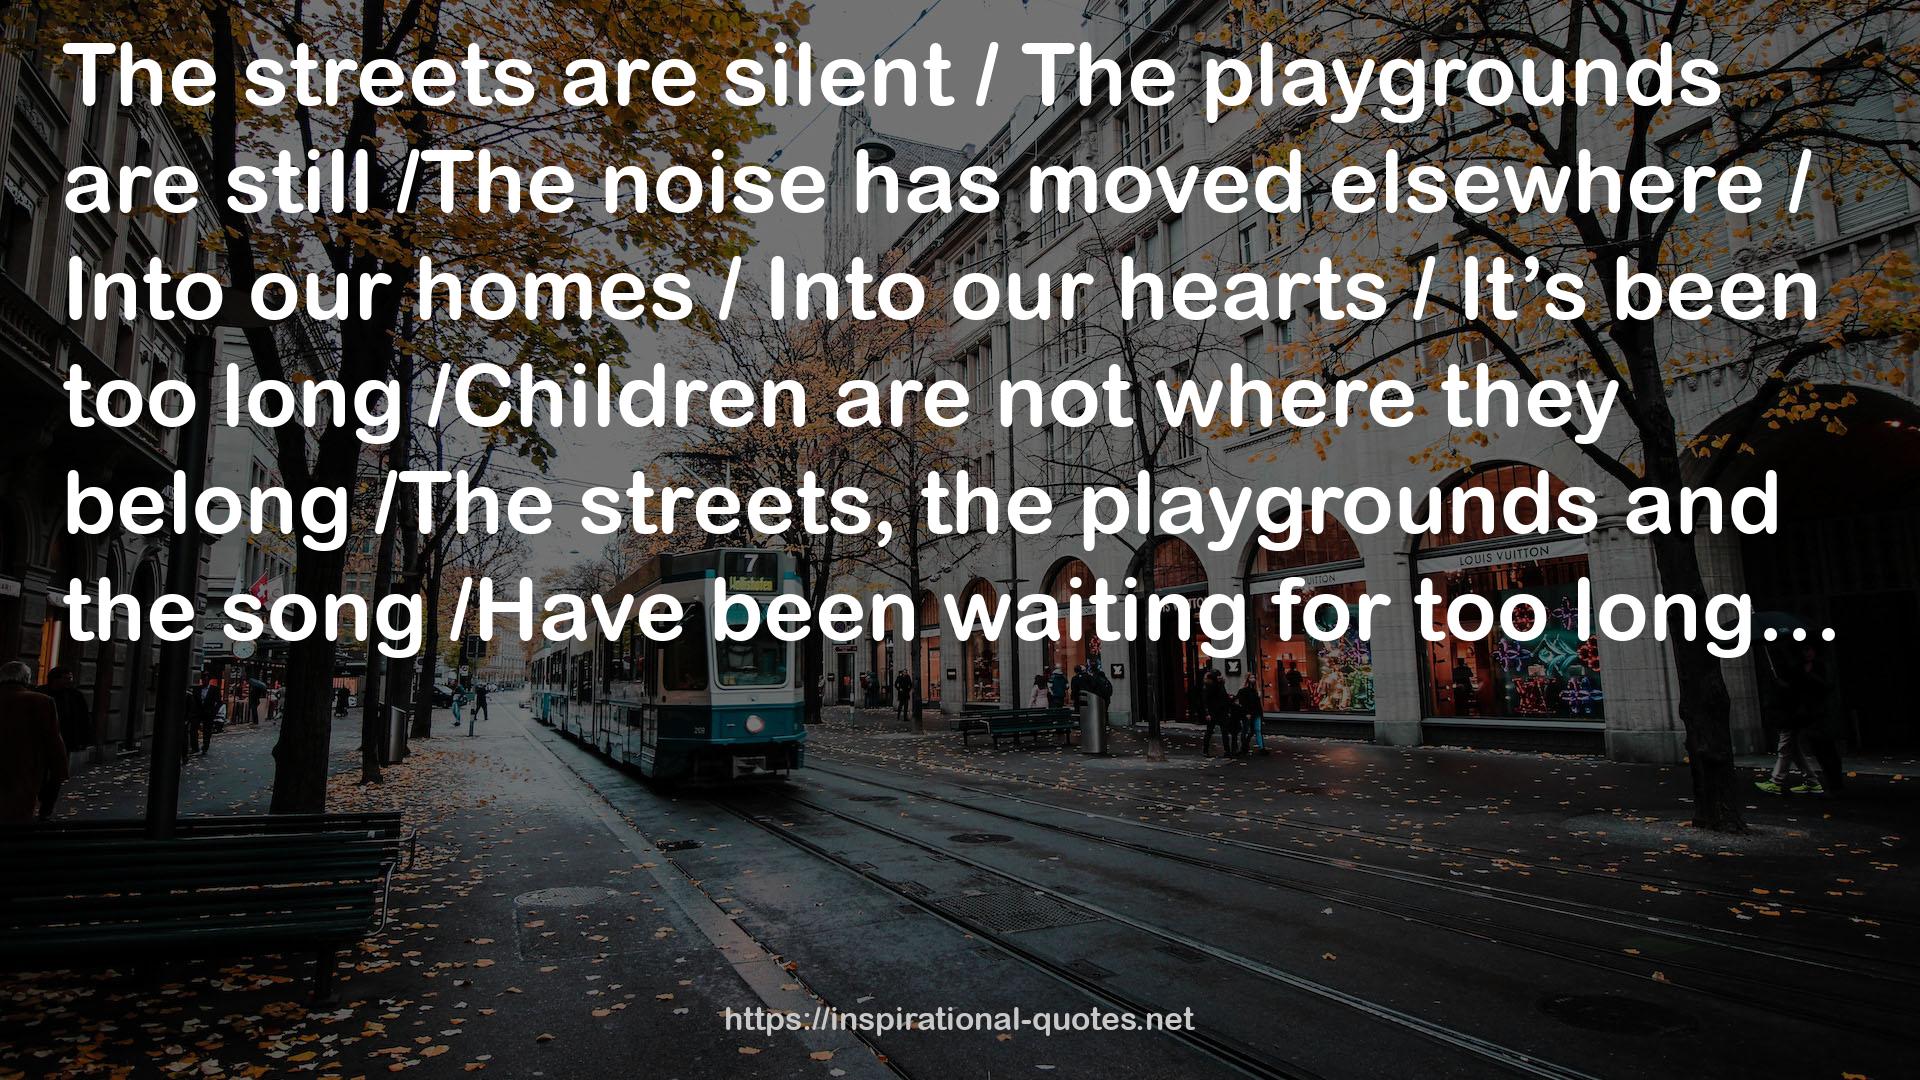 The playgrounds  QUOTES